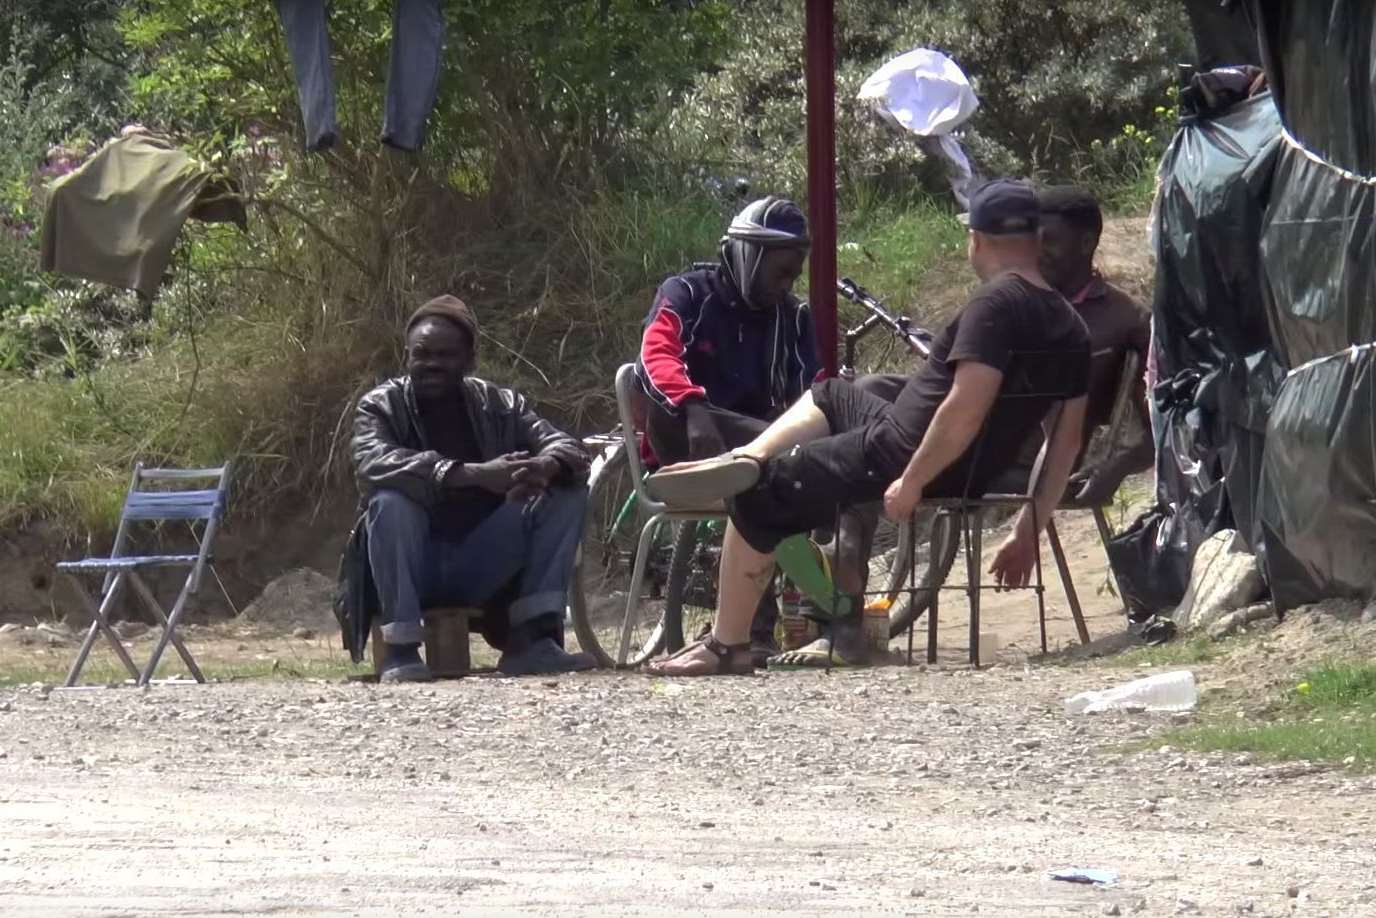 Migrants at the camp in Calais, near the Eurotunnel terminal